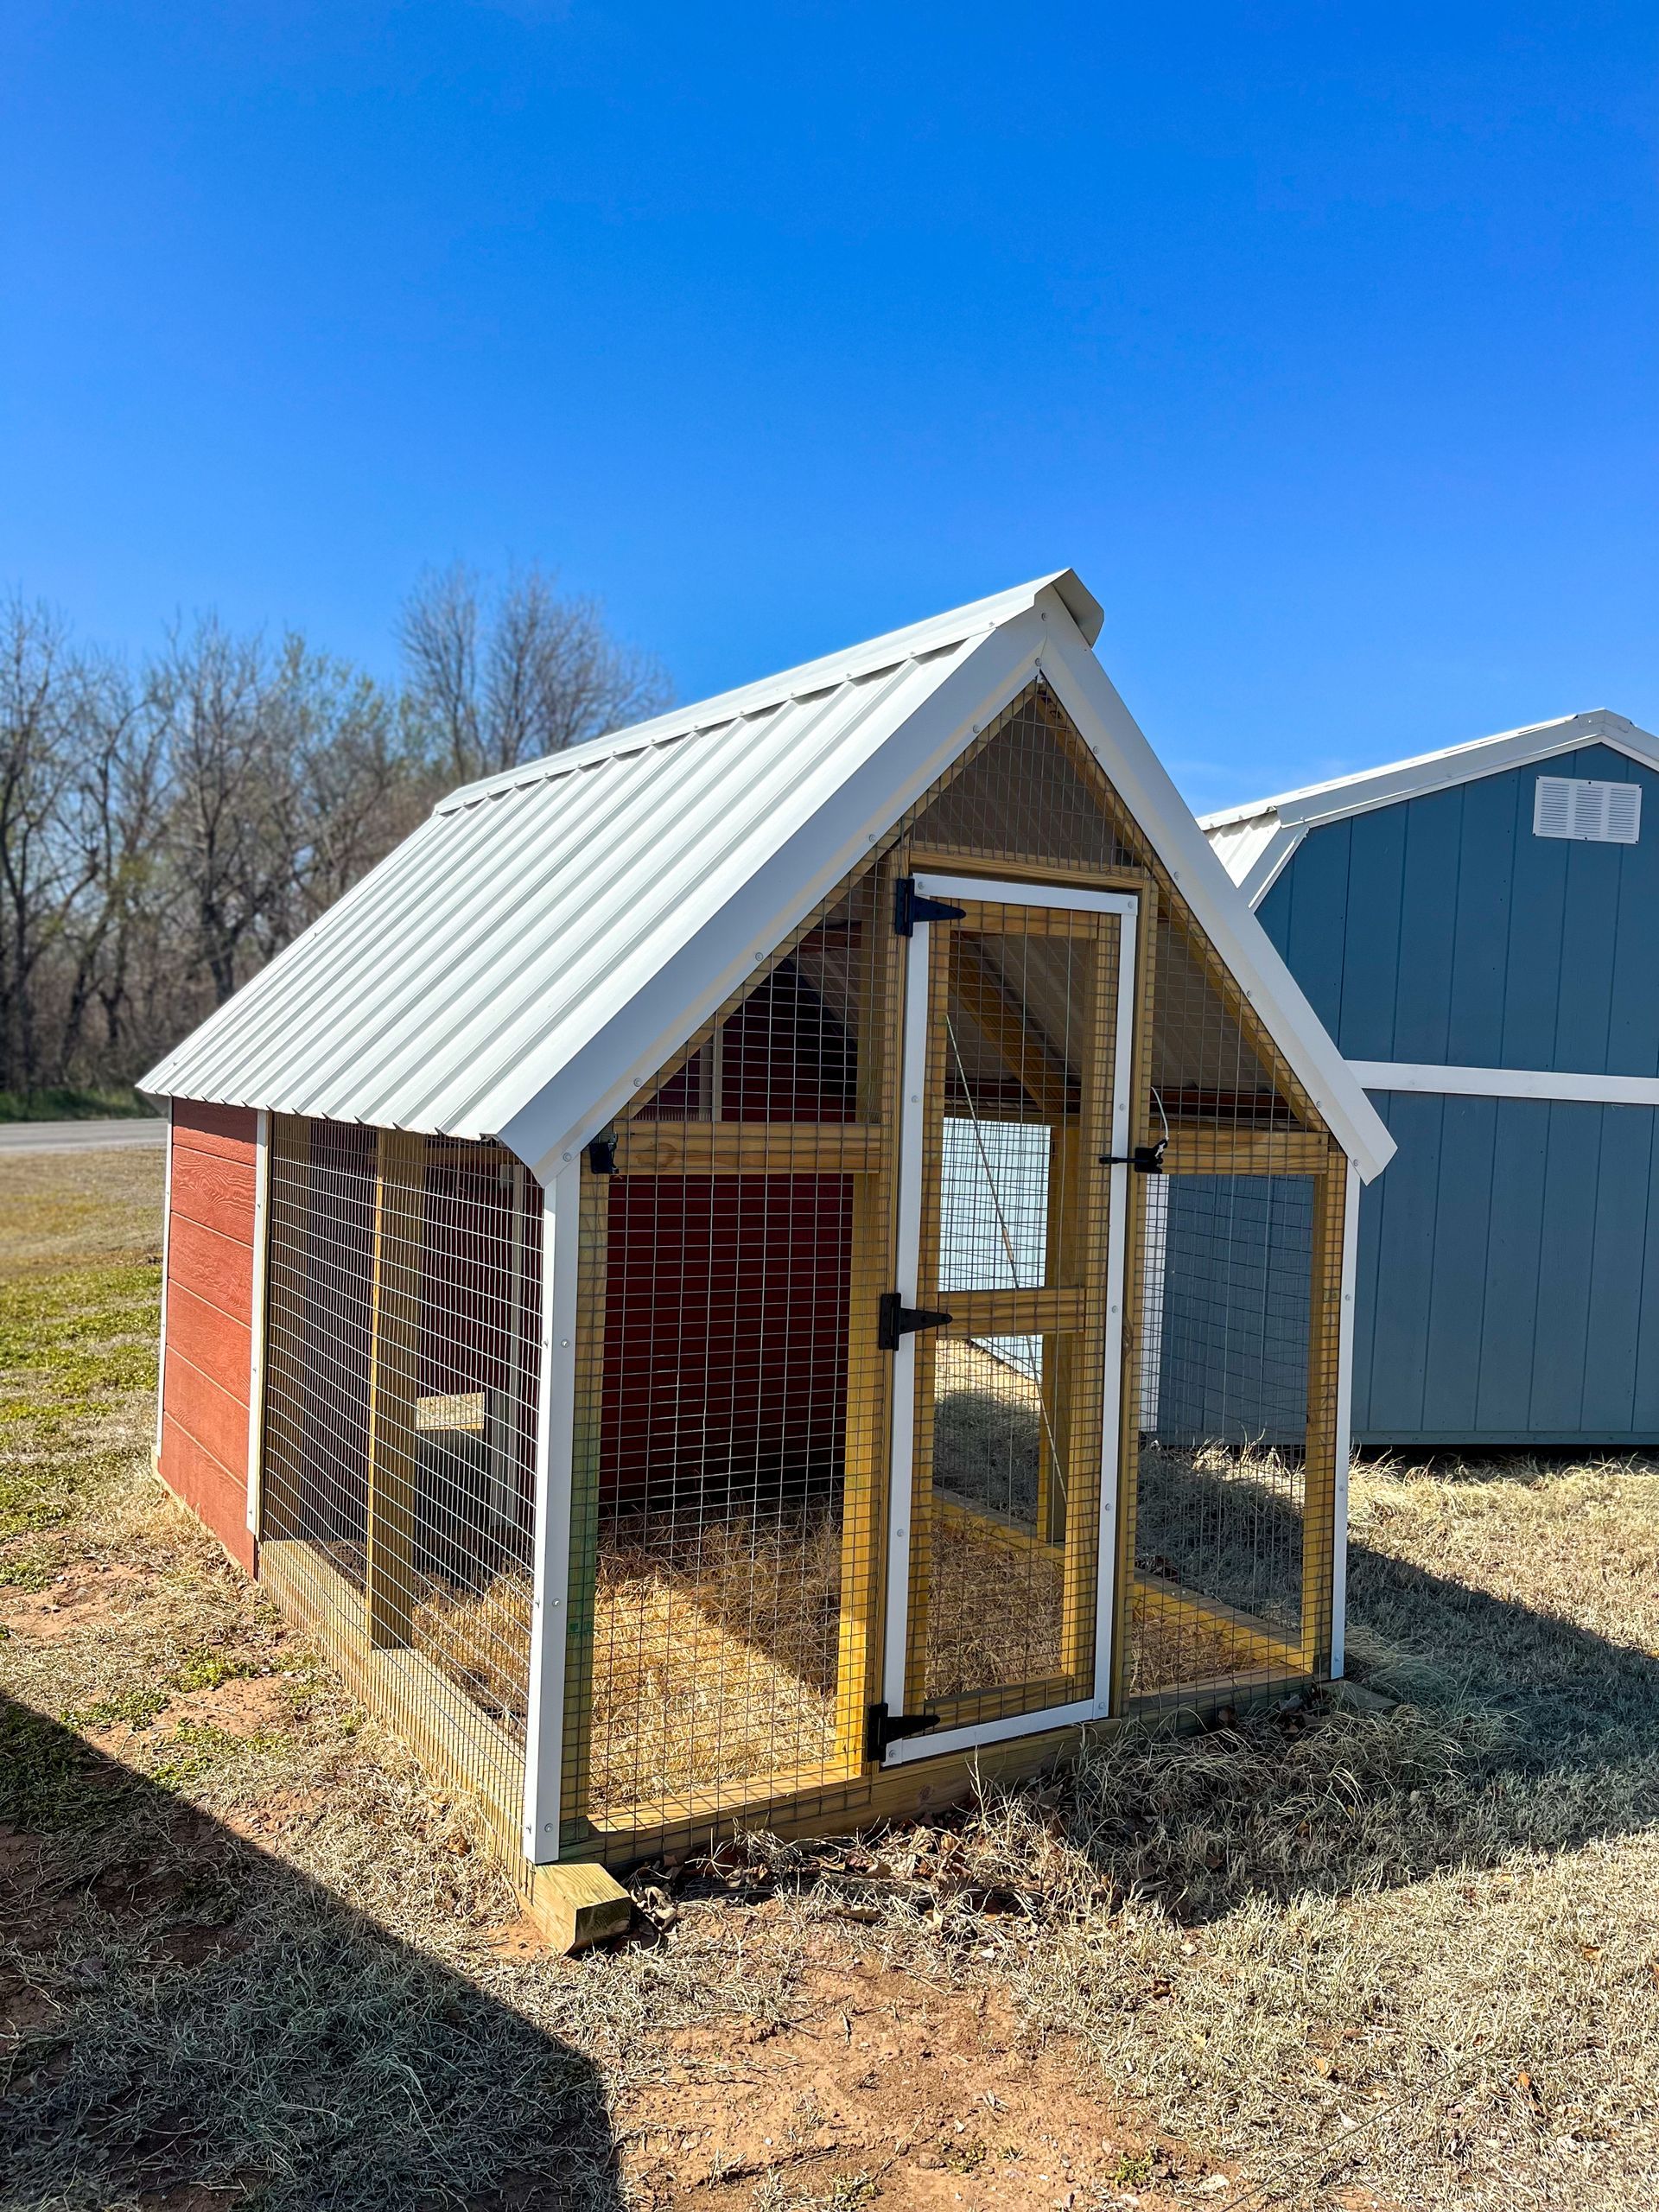 A small wooden chicken coop with a metal roof is sitting on top of a dirt field.